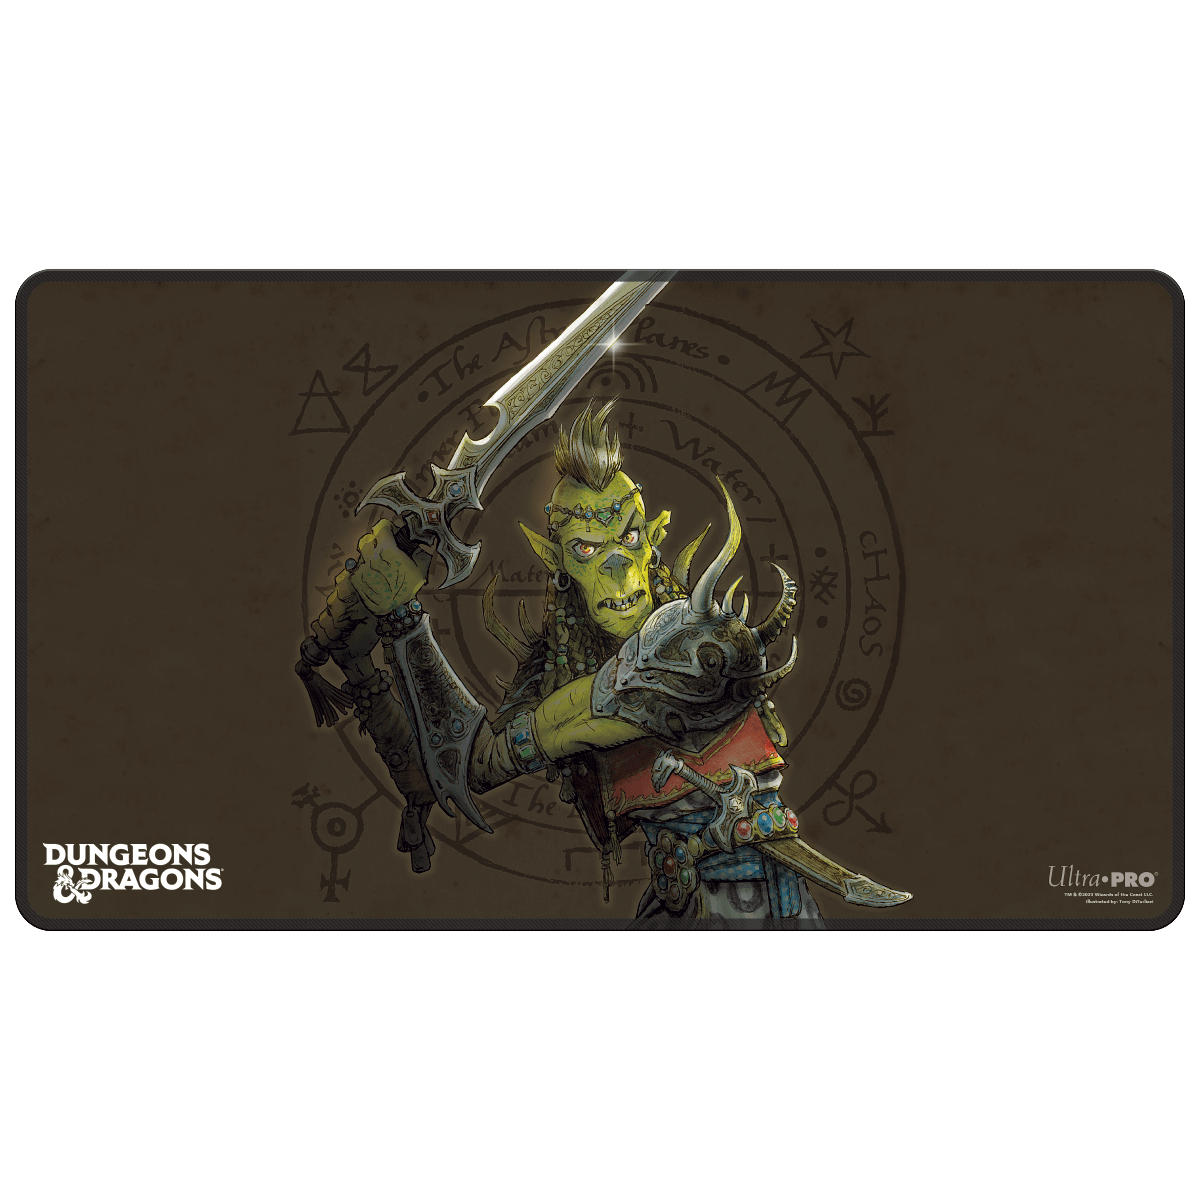 Planescape: Adventures in the Multiverse for Dungeons & Dragons Black Stitched Playmat - Morte’s Planar Parade Alternate Cover Artwork v1 | Ultra PRO International